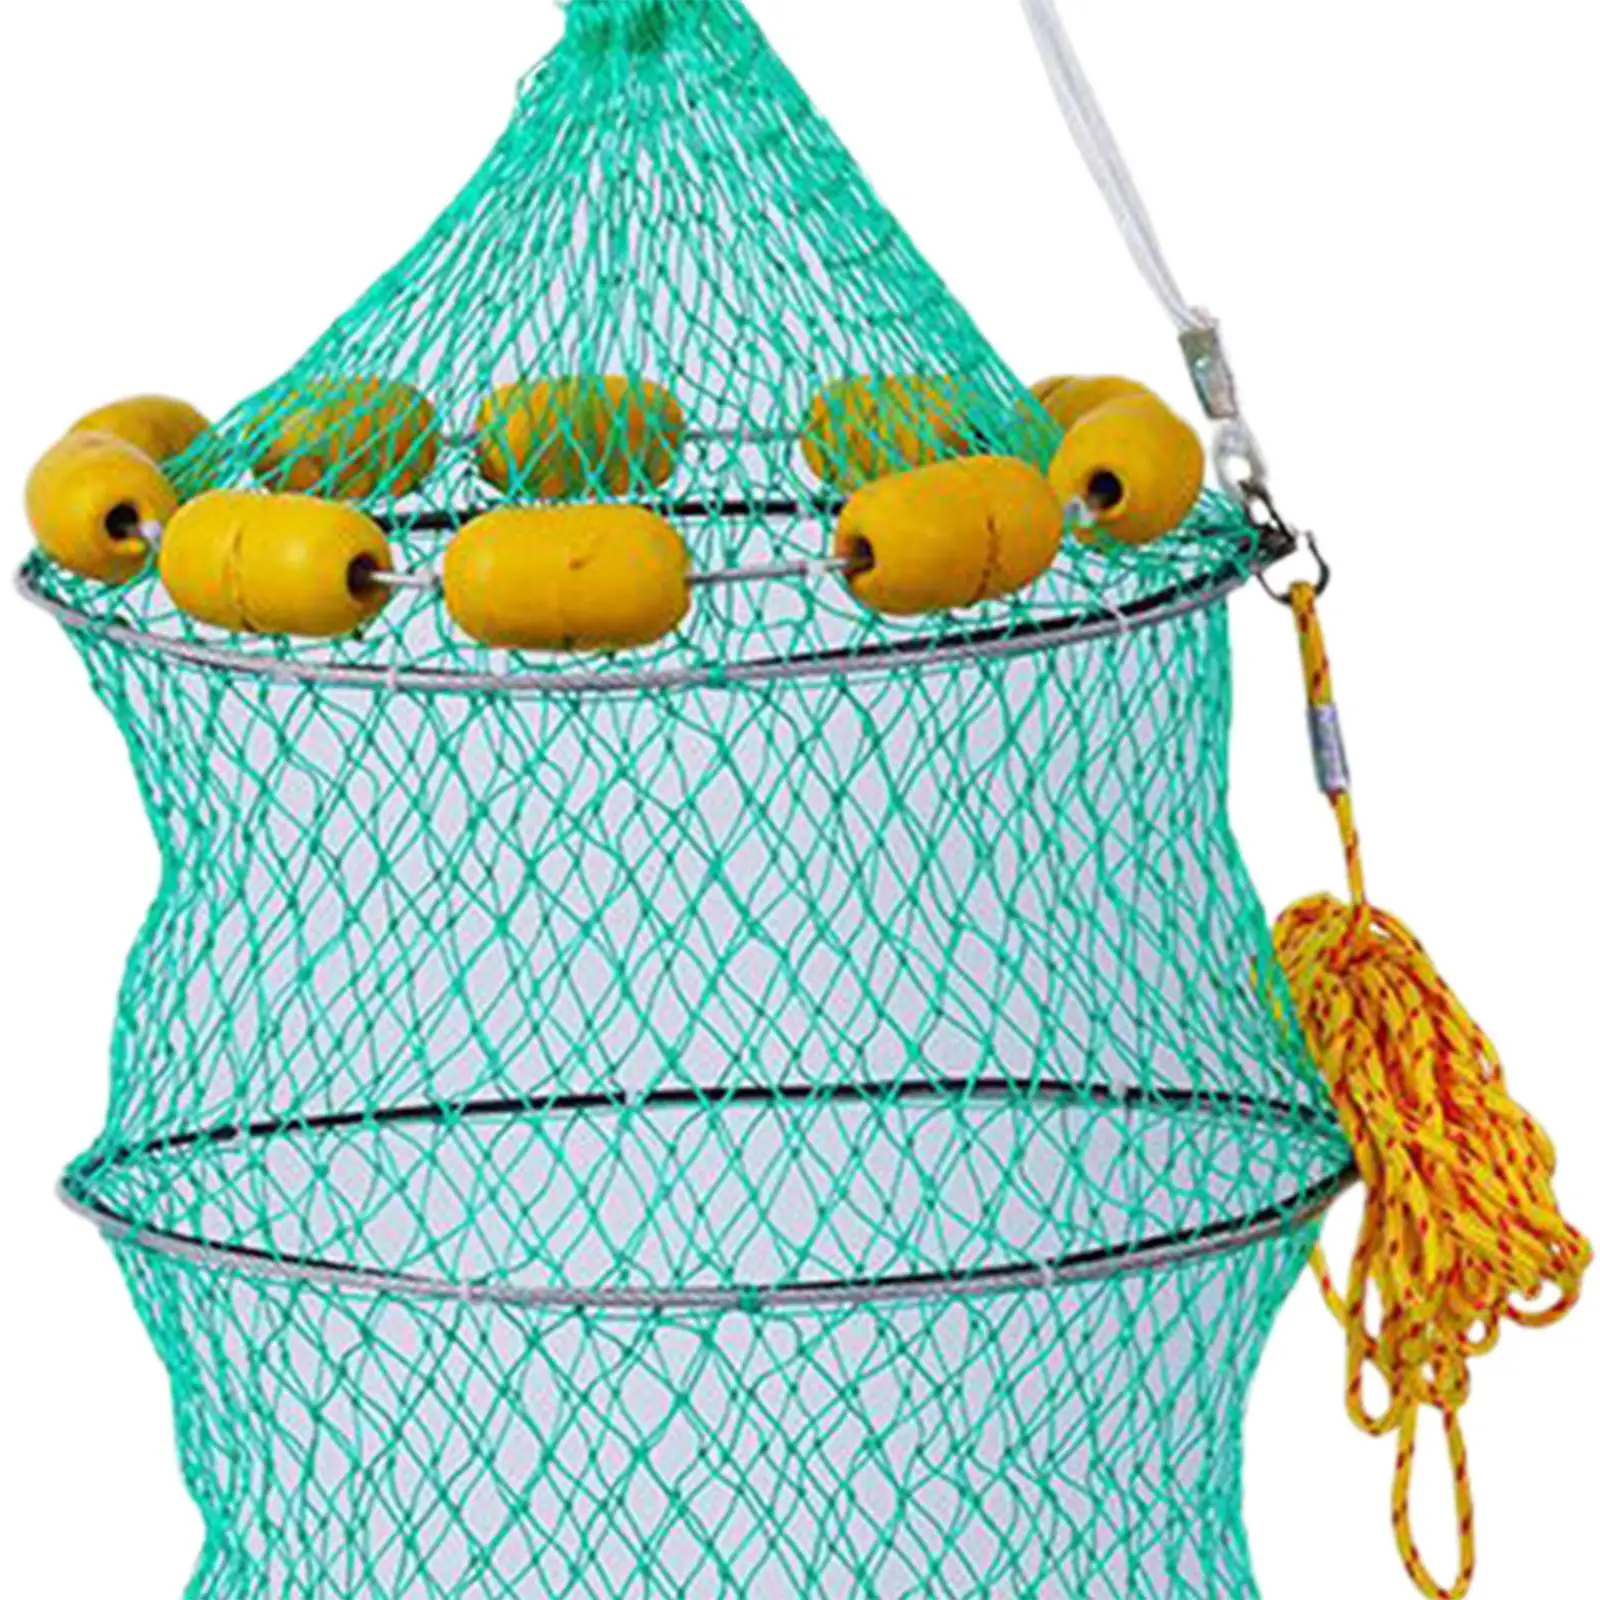 Fish Protection Net 3 Layers Collapsible Thickened Woven Fish Basket with Fishing Rope Mesh Fishing Keep Net Fishing Tool